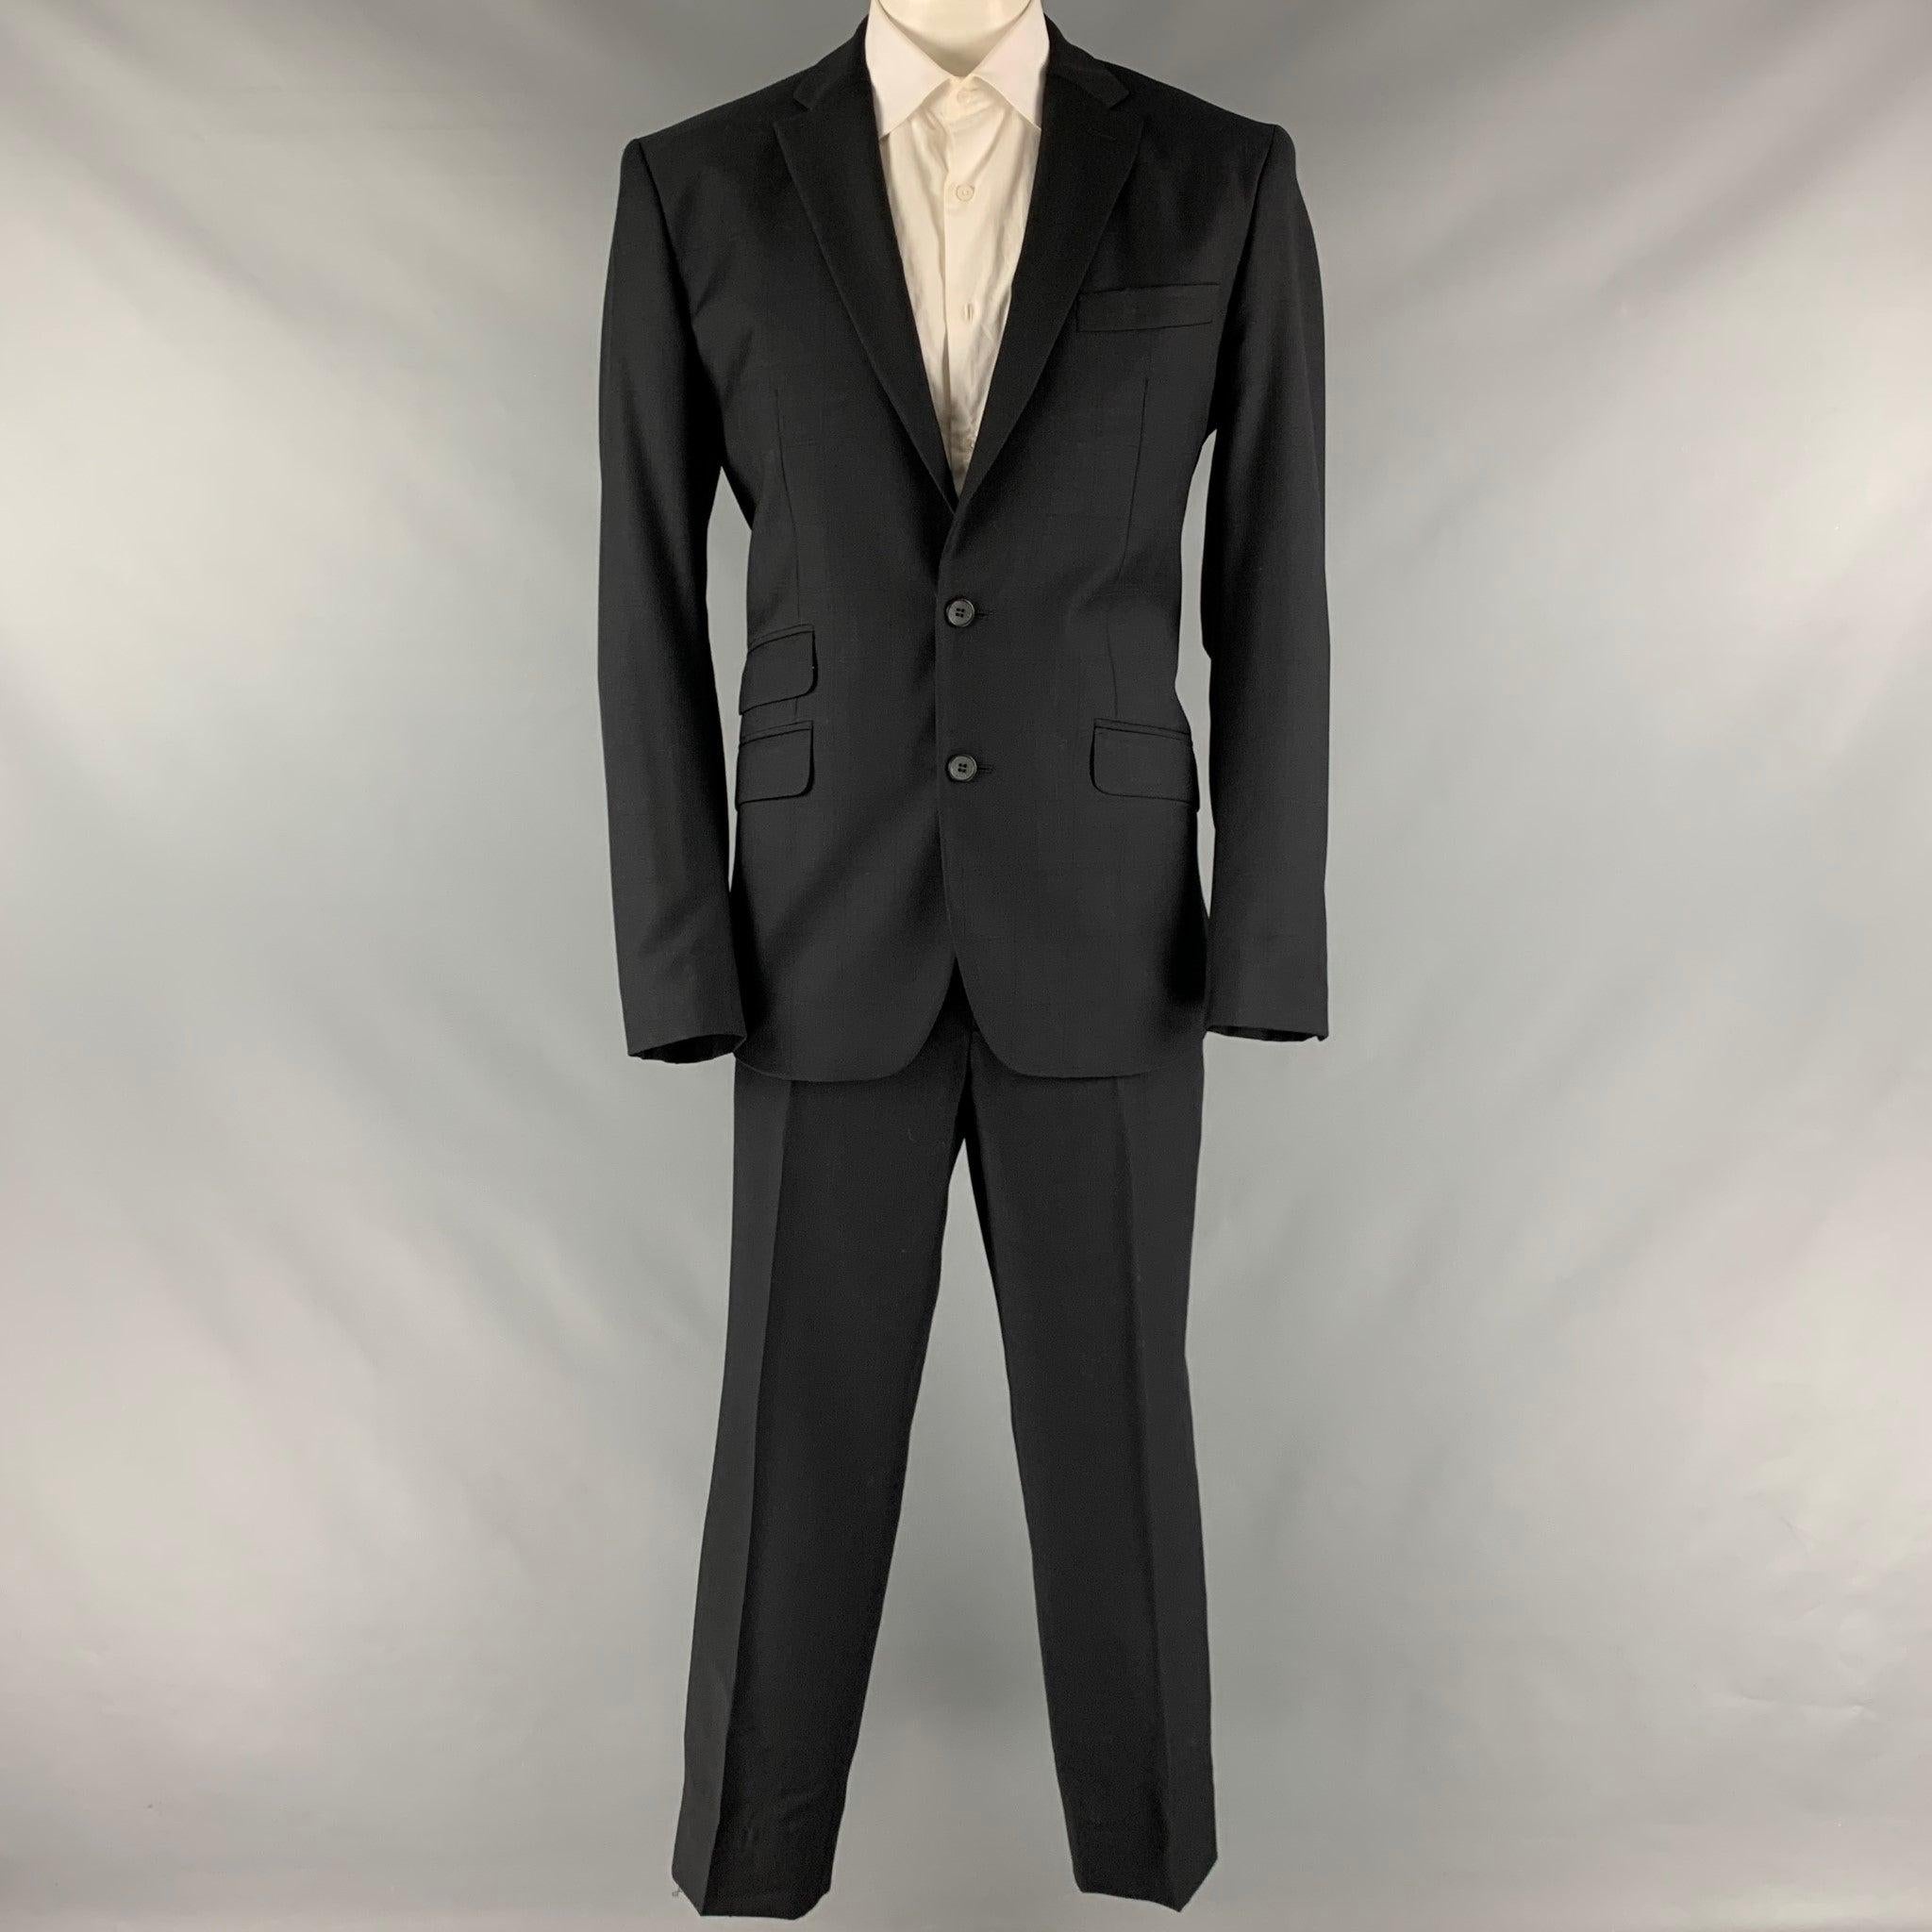 D&G by DOLCE & GABBANA suit comes in a black window pane wool and viscose material with a full liner and includes a single breasted, double button sport coat with a notch lapel and matching flat front trousers. Very Good Pre-Owned Condition. Minor